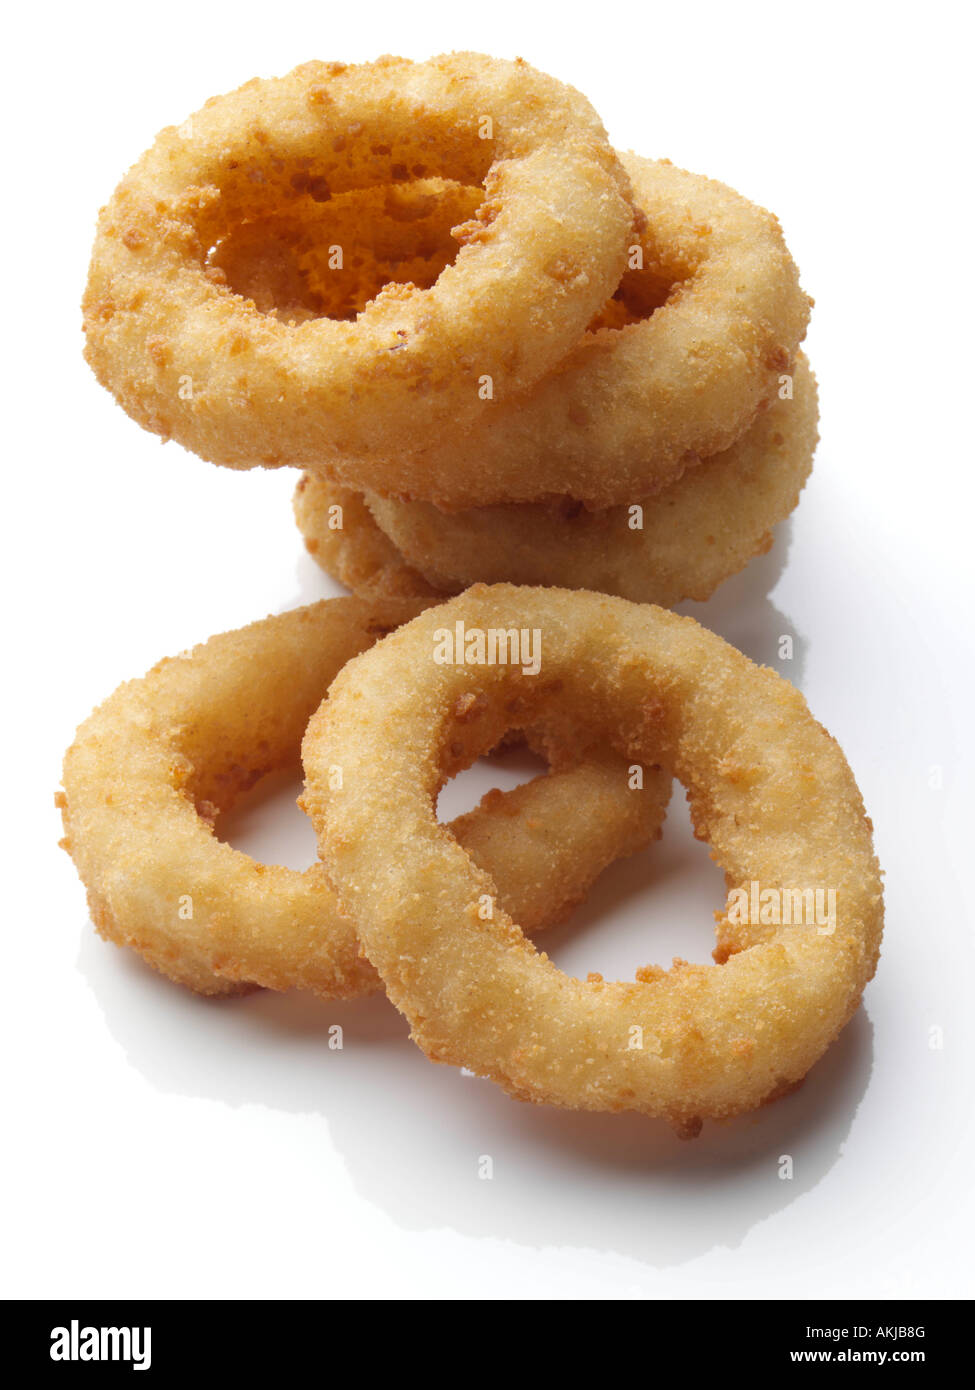 Battered onion rings editorial fast junk food Stock Photo